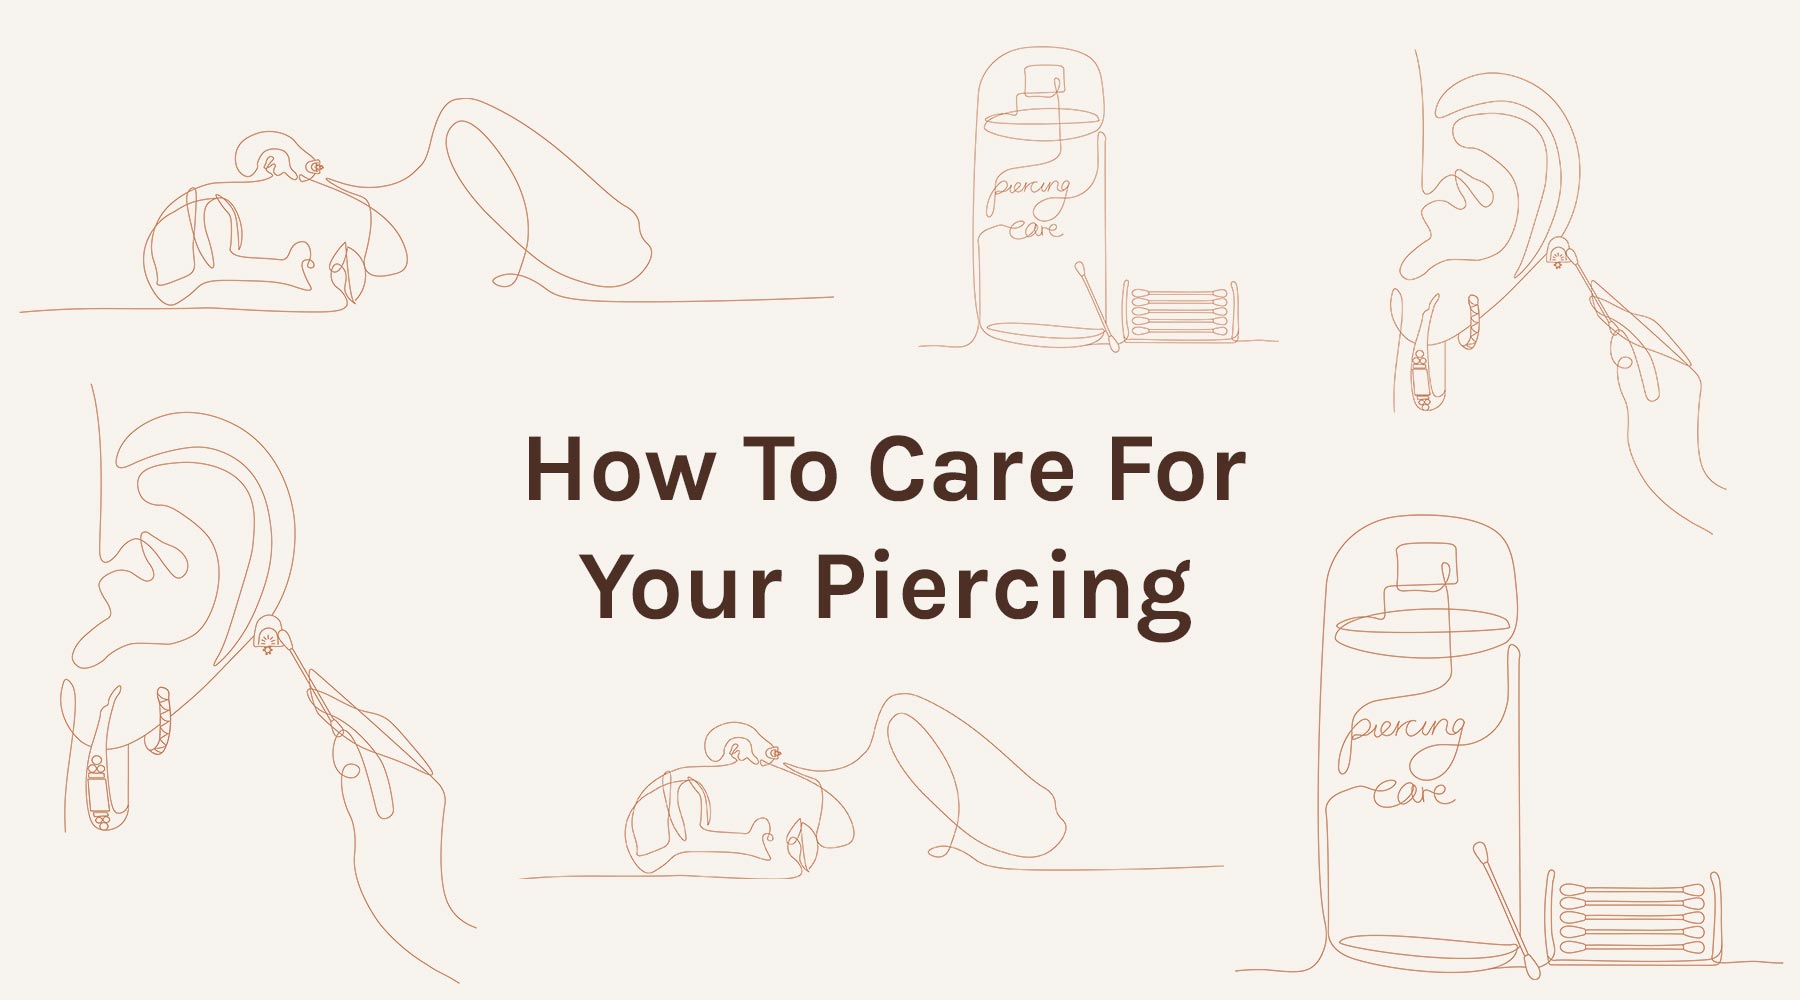 How To Care For Your Piercing